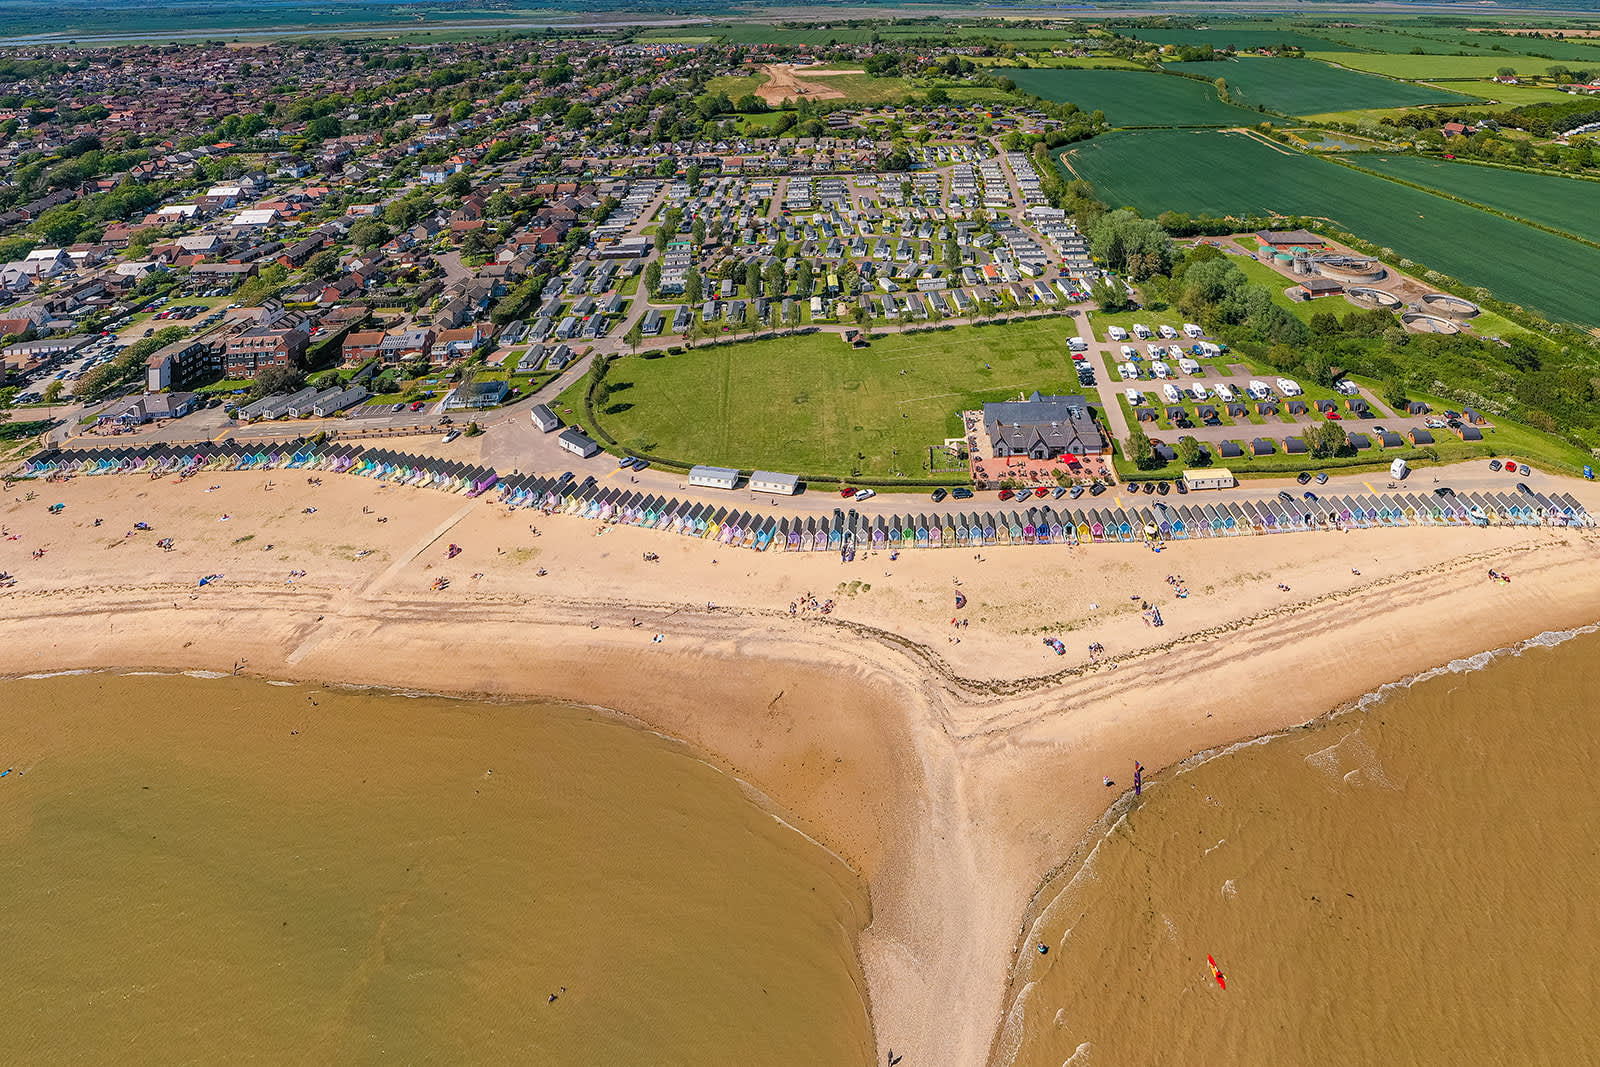 Mersea's famous pastel beach huts are captured from a distance in a drone shot that highlights the nearby sandy beaches and green fields